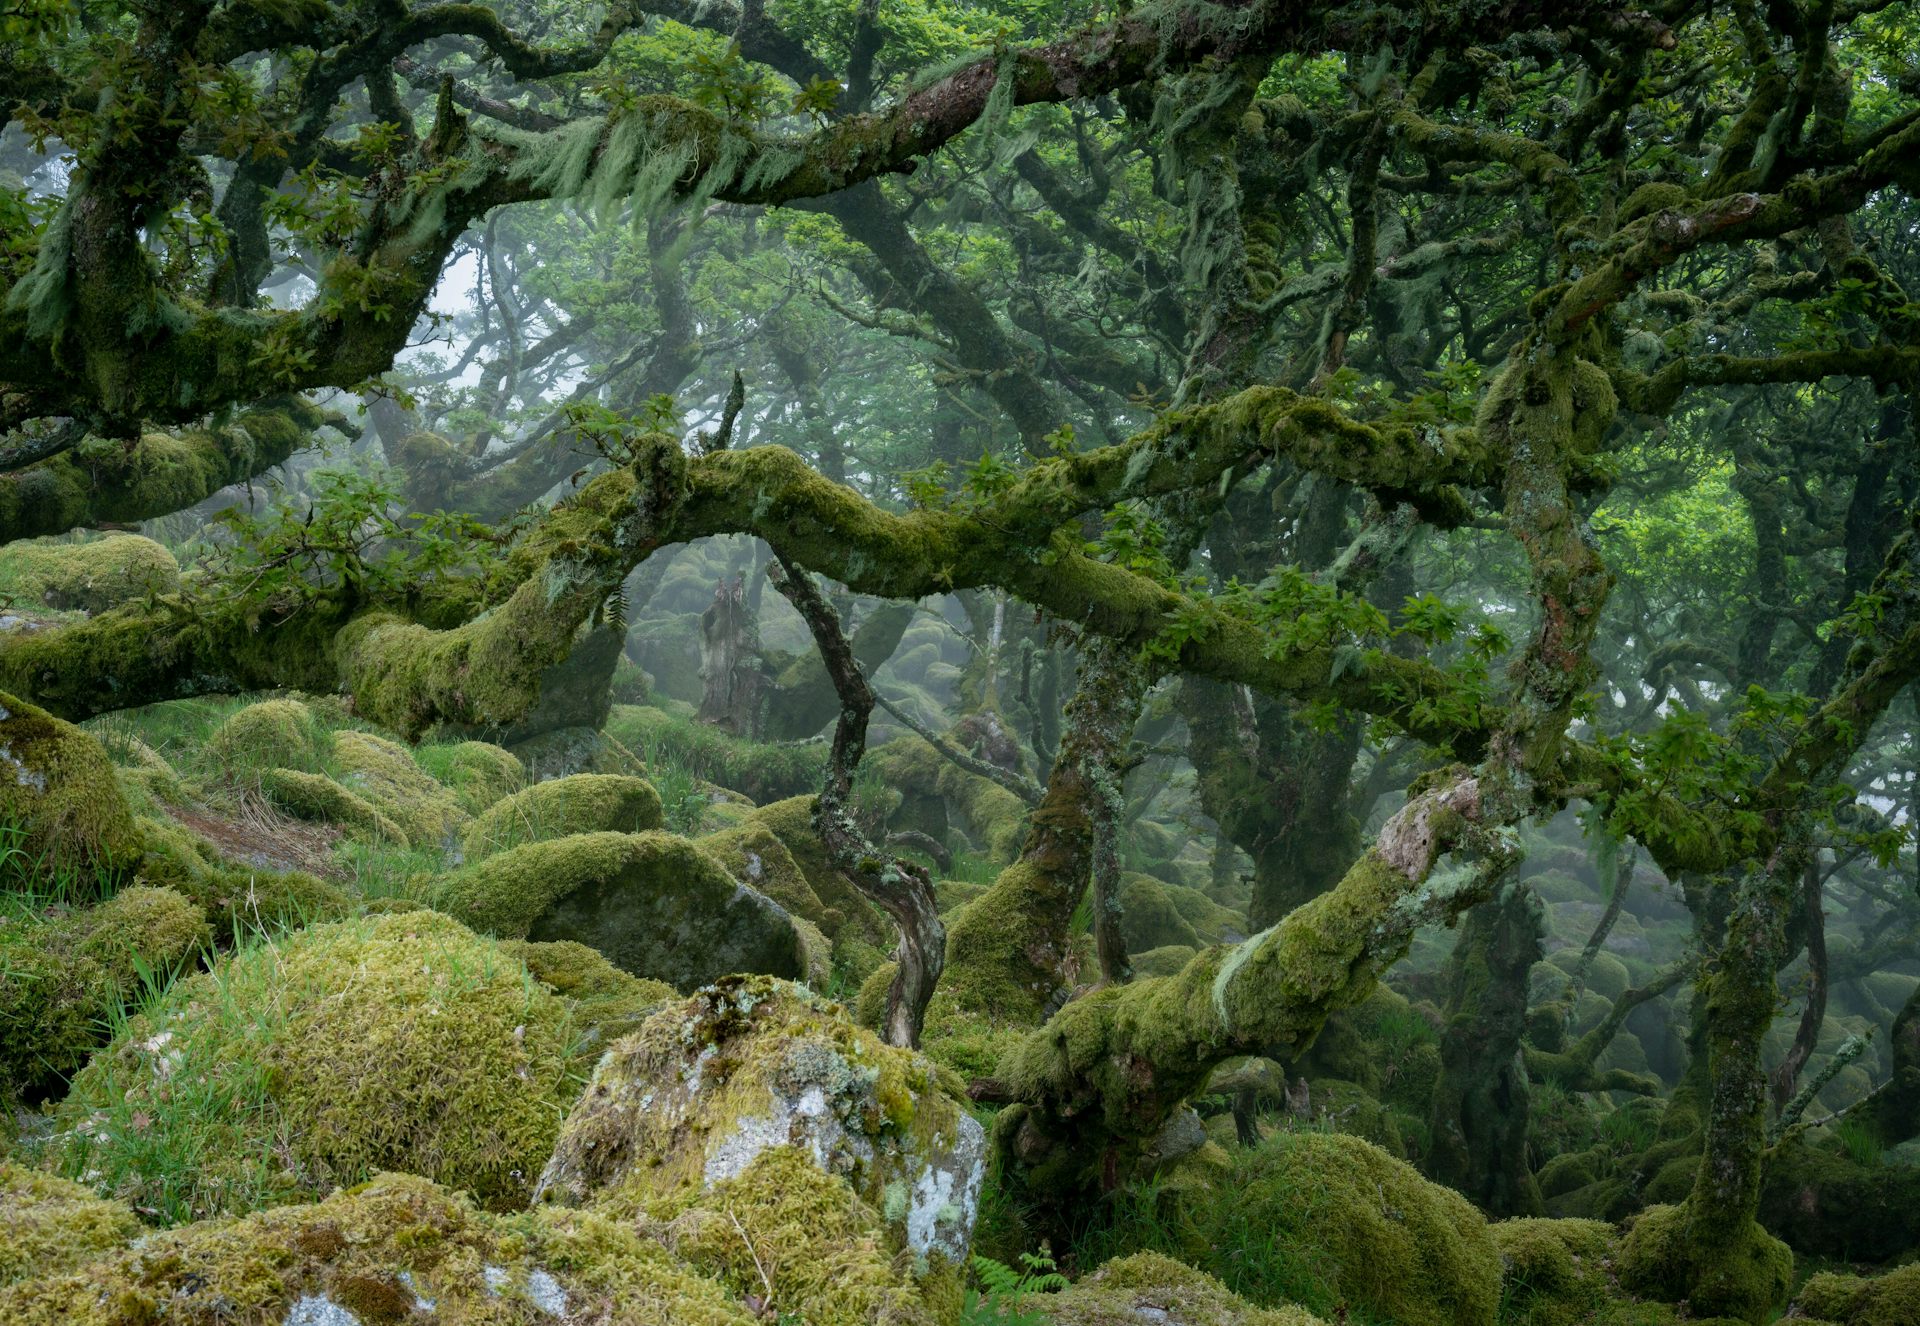 How to recognise a temperate rainforest in Britain and Ireland when you see one